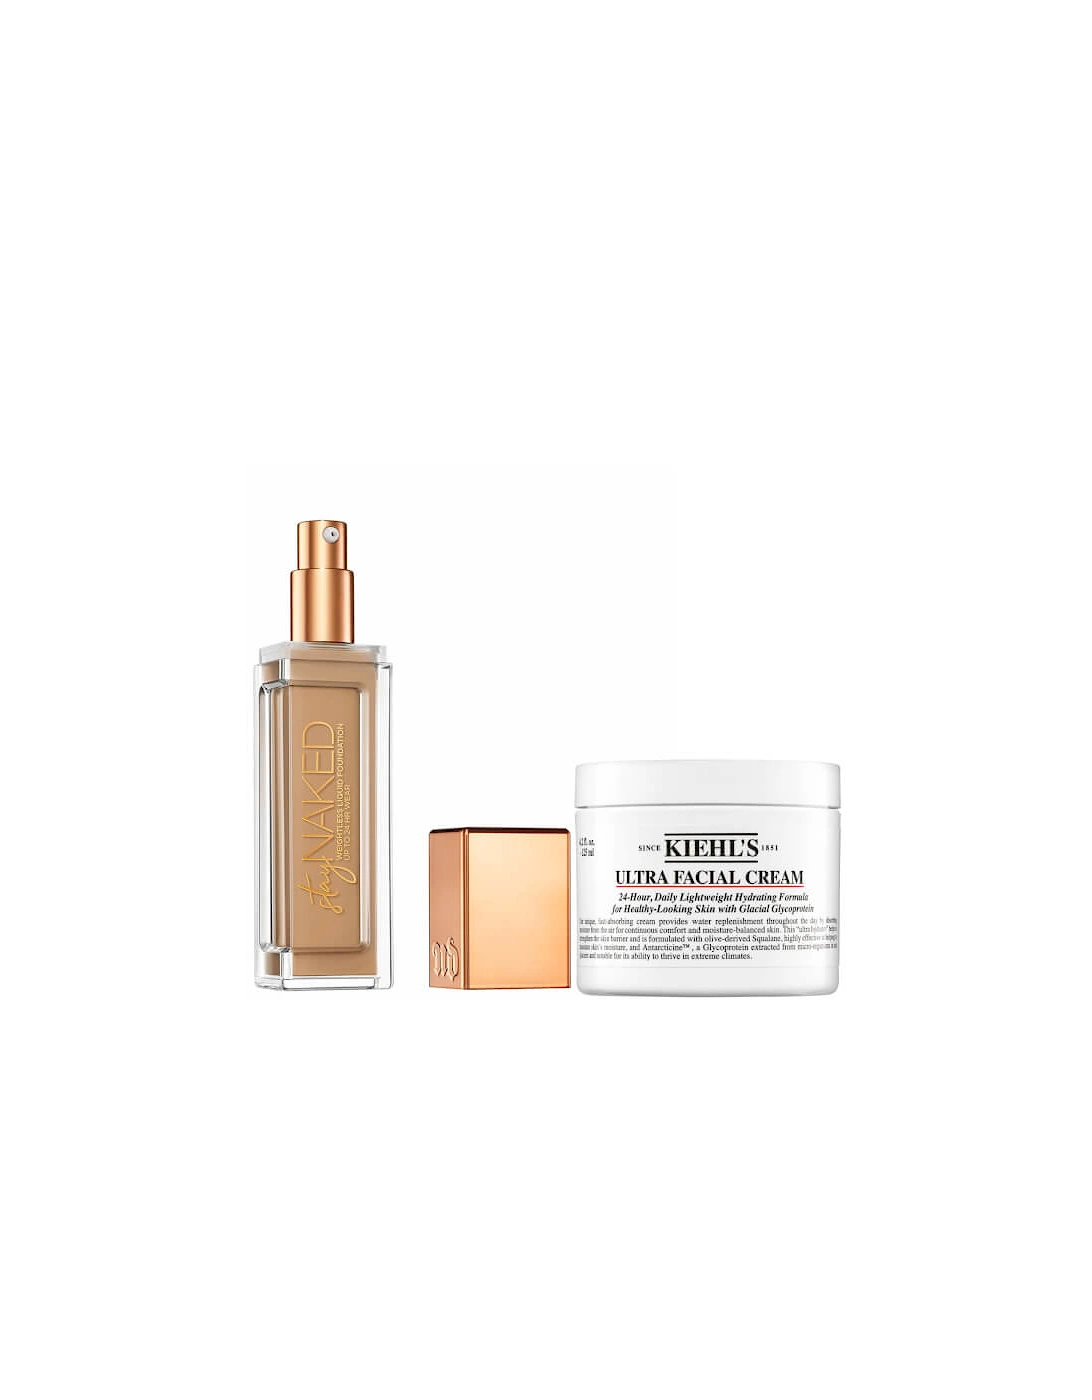 Stay Naked Foundation x Kiehl's Ultra Facial Cream 125ml Bundle - 50WY, 2 of 1